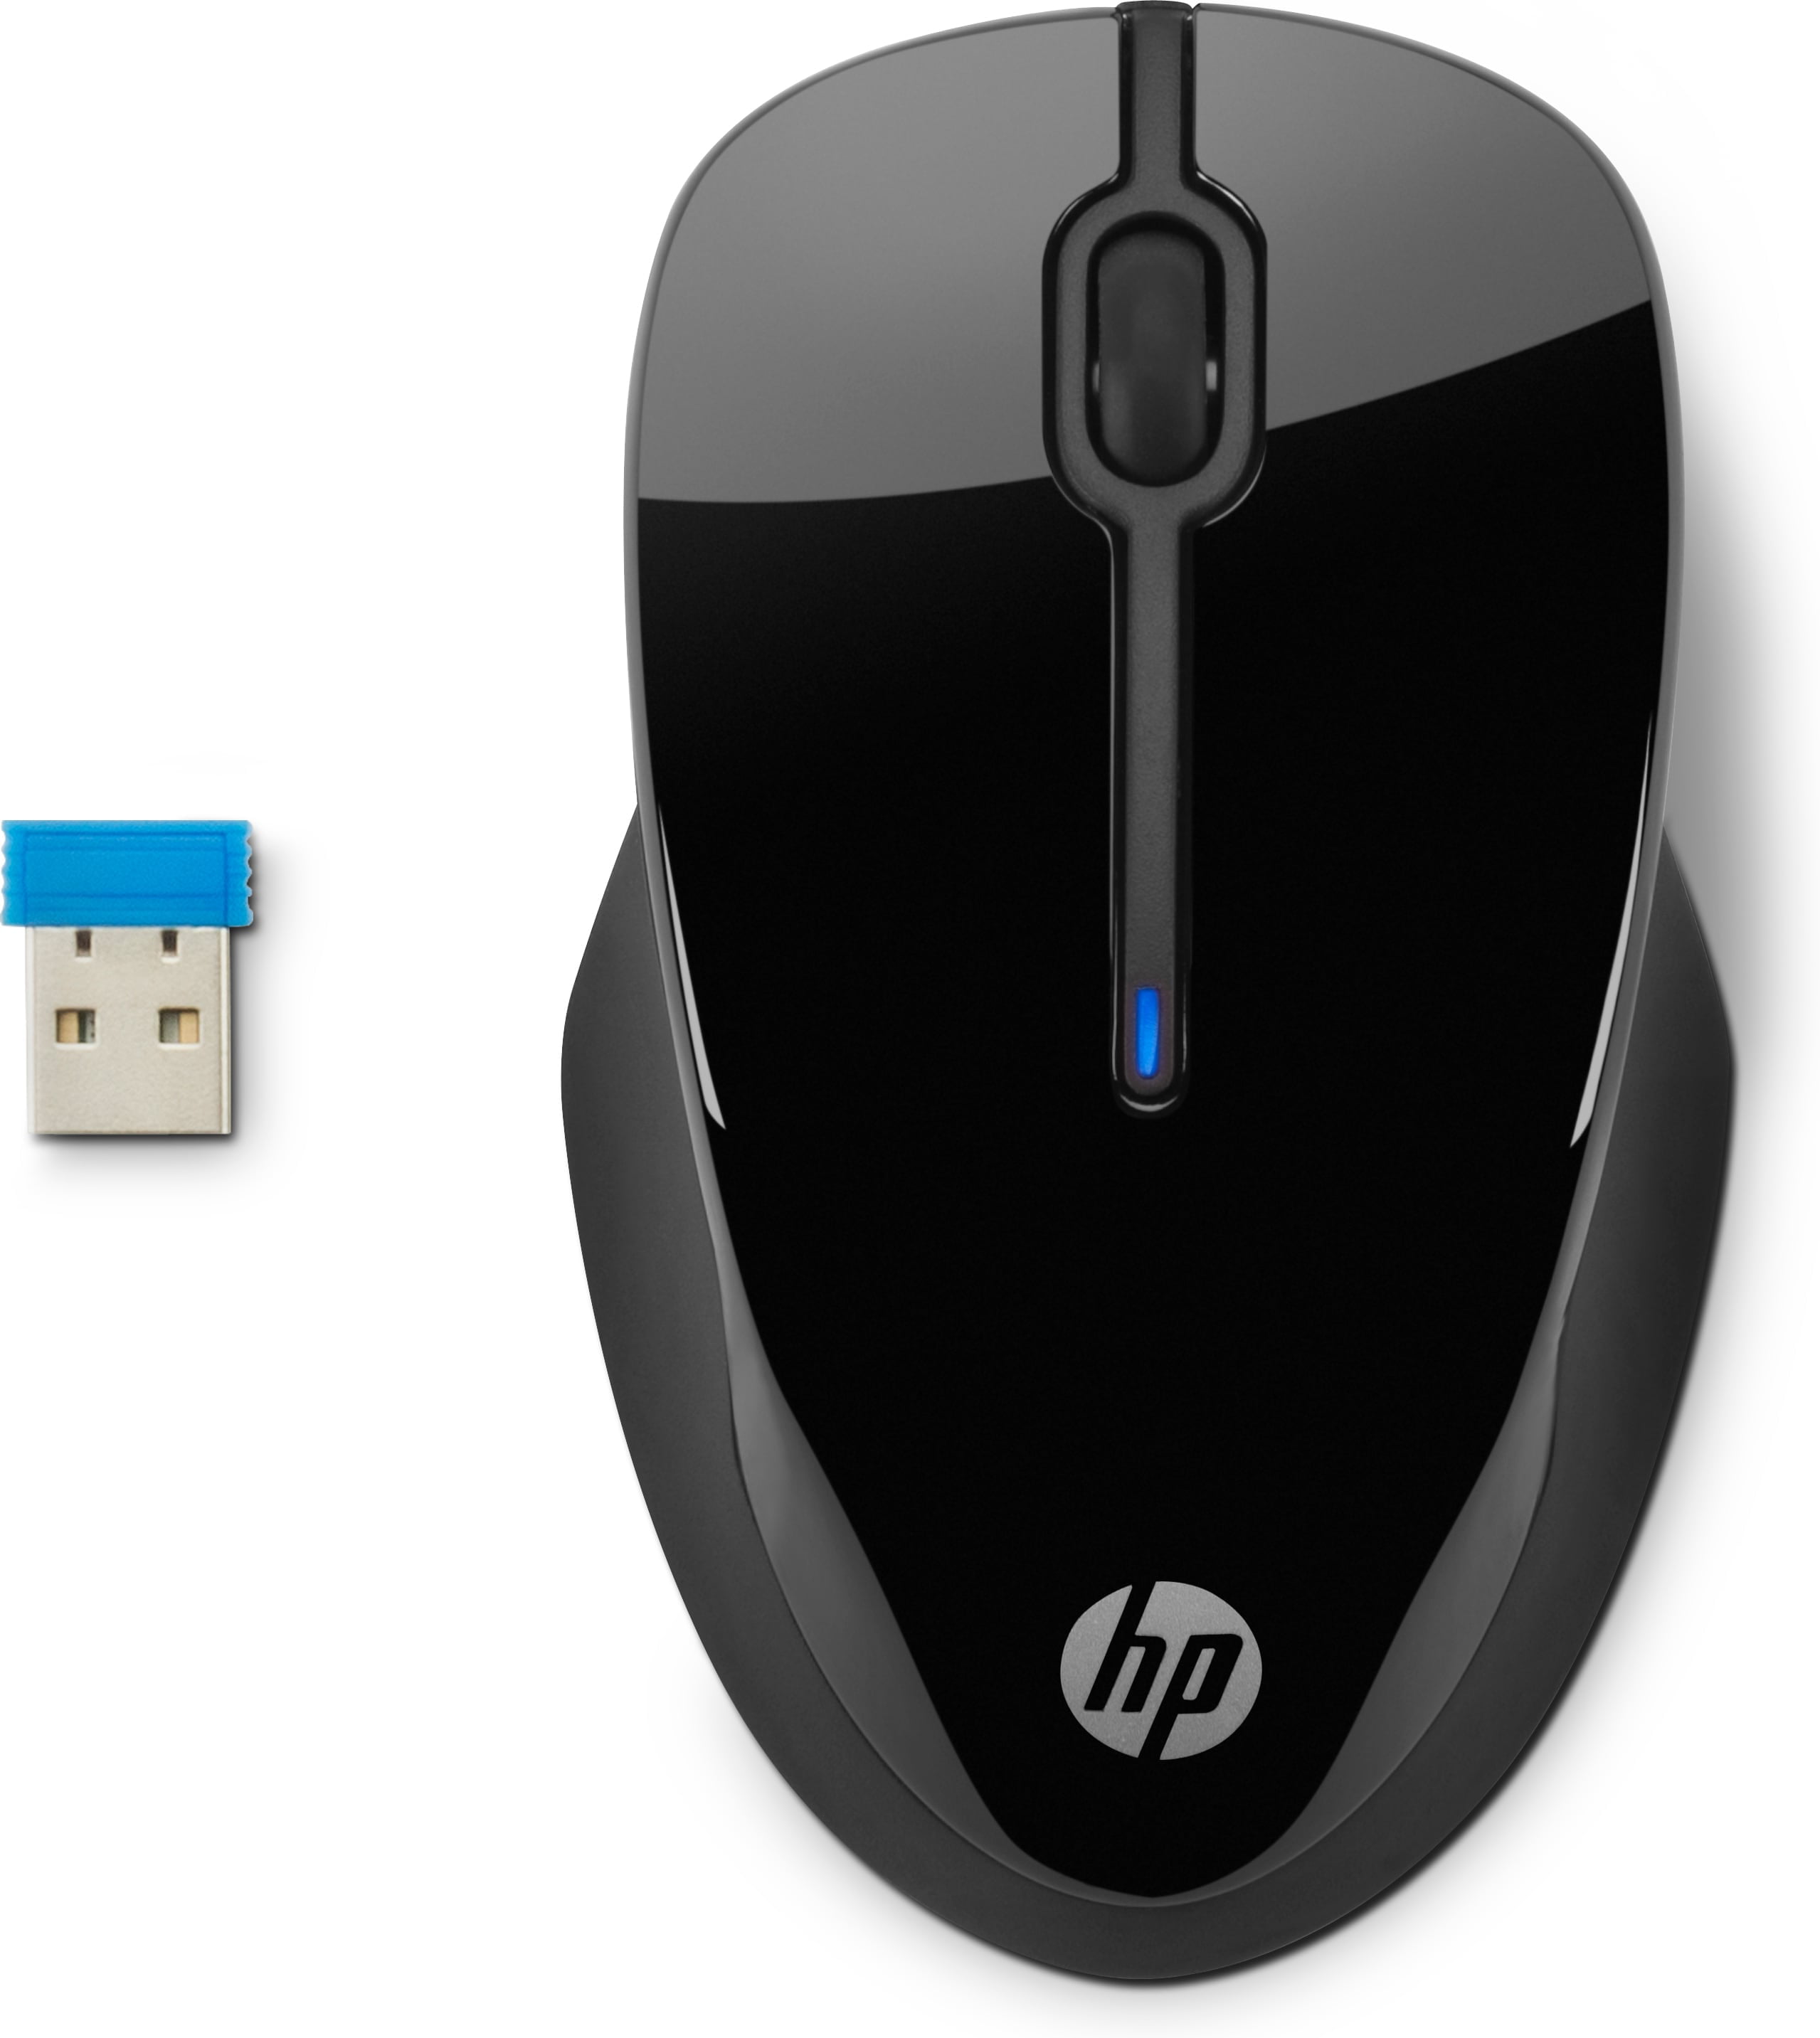 hp wireless mouse x3000 install battery